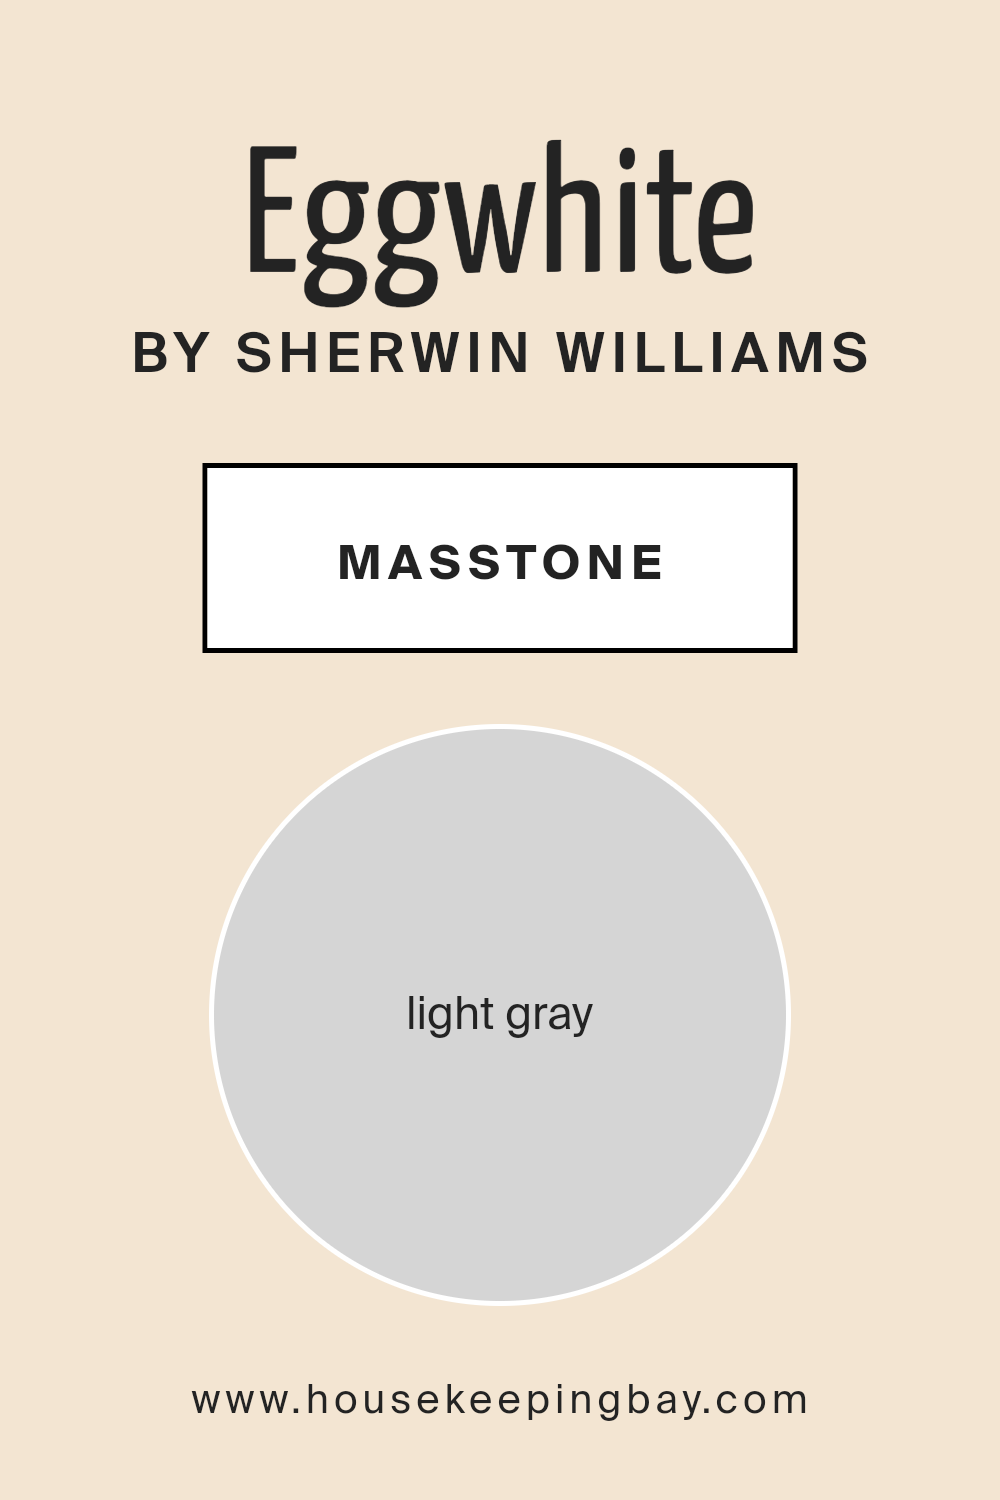 what_is_the_masstone_of_eggwhite_sw_6364